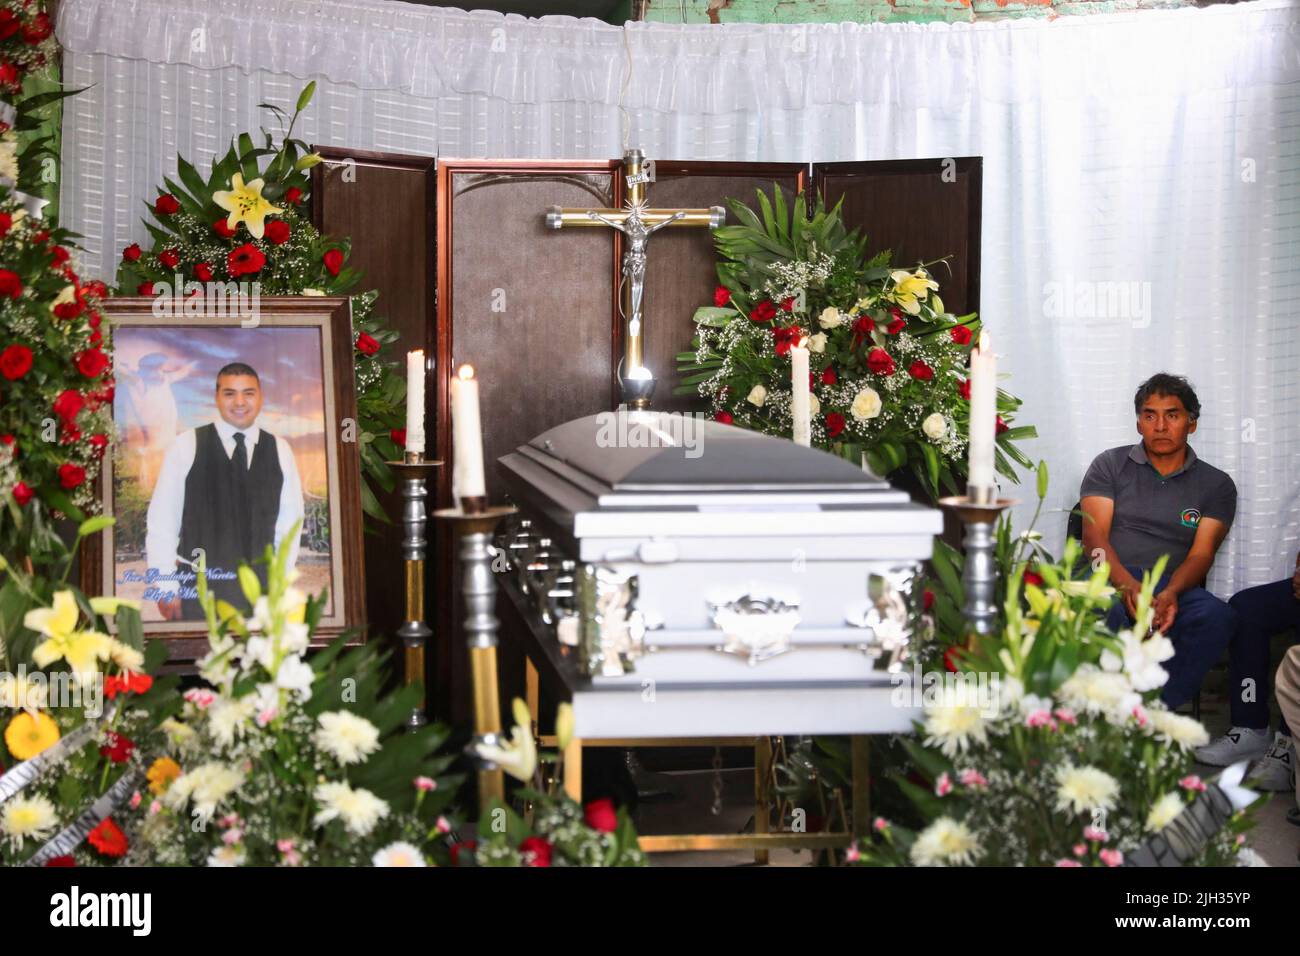 Narciso Lopez, father of late migrant Jose Lopez, 34, sits next to the coffin of his son during his wake after being repatriated from San Antonio, Texas, U.S., at his family's home in Celaya, in Guanajuato state, Mexico July 14, 2022. REUTERS/Edgard Garrido Stock Photo